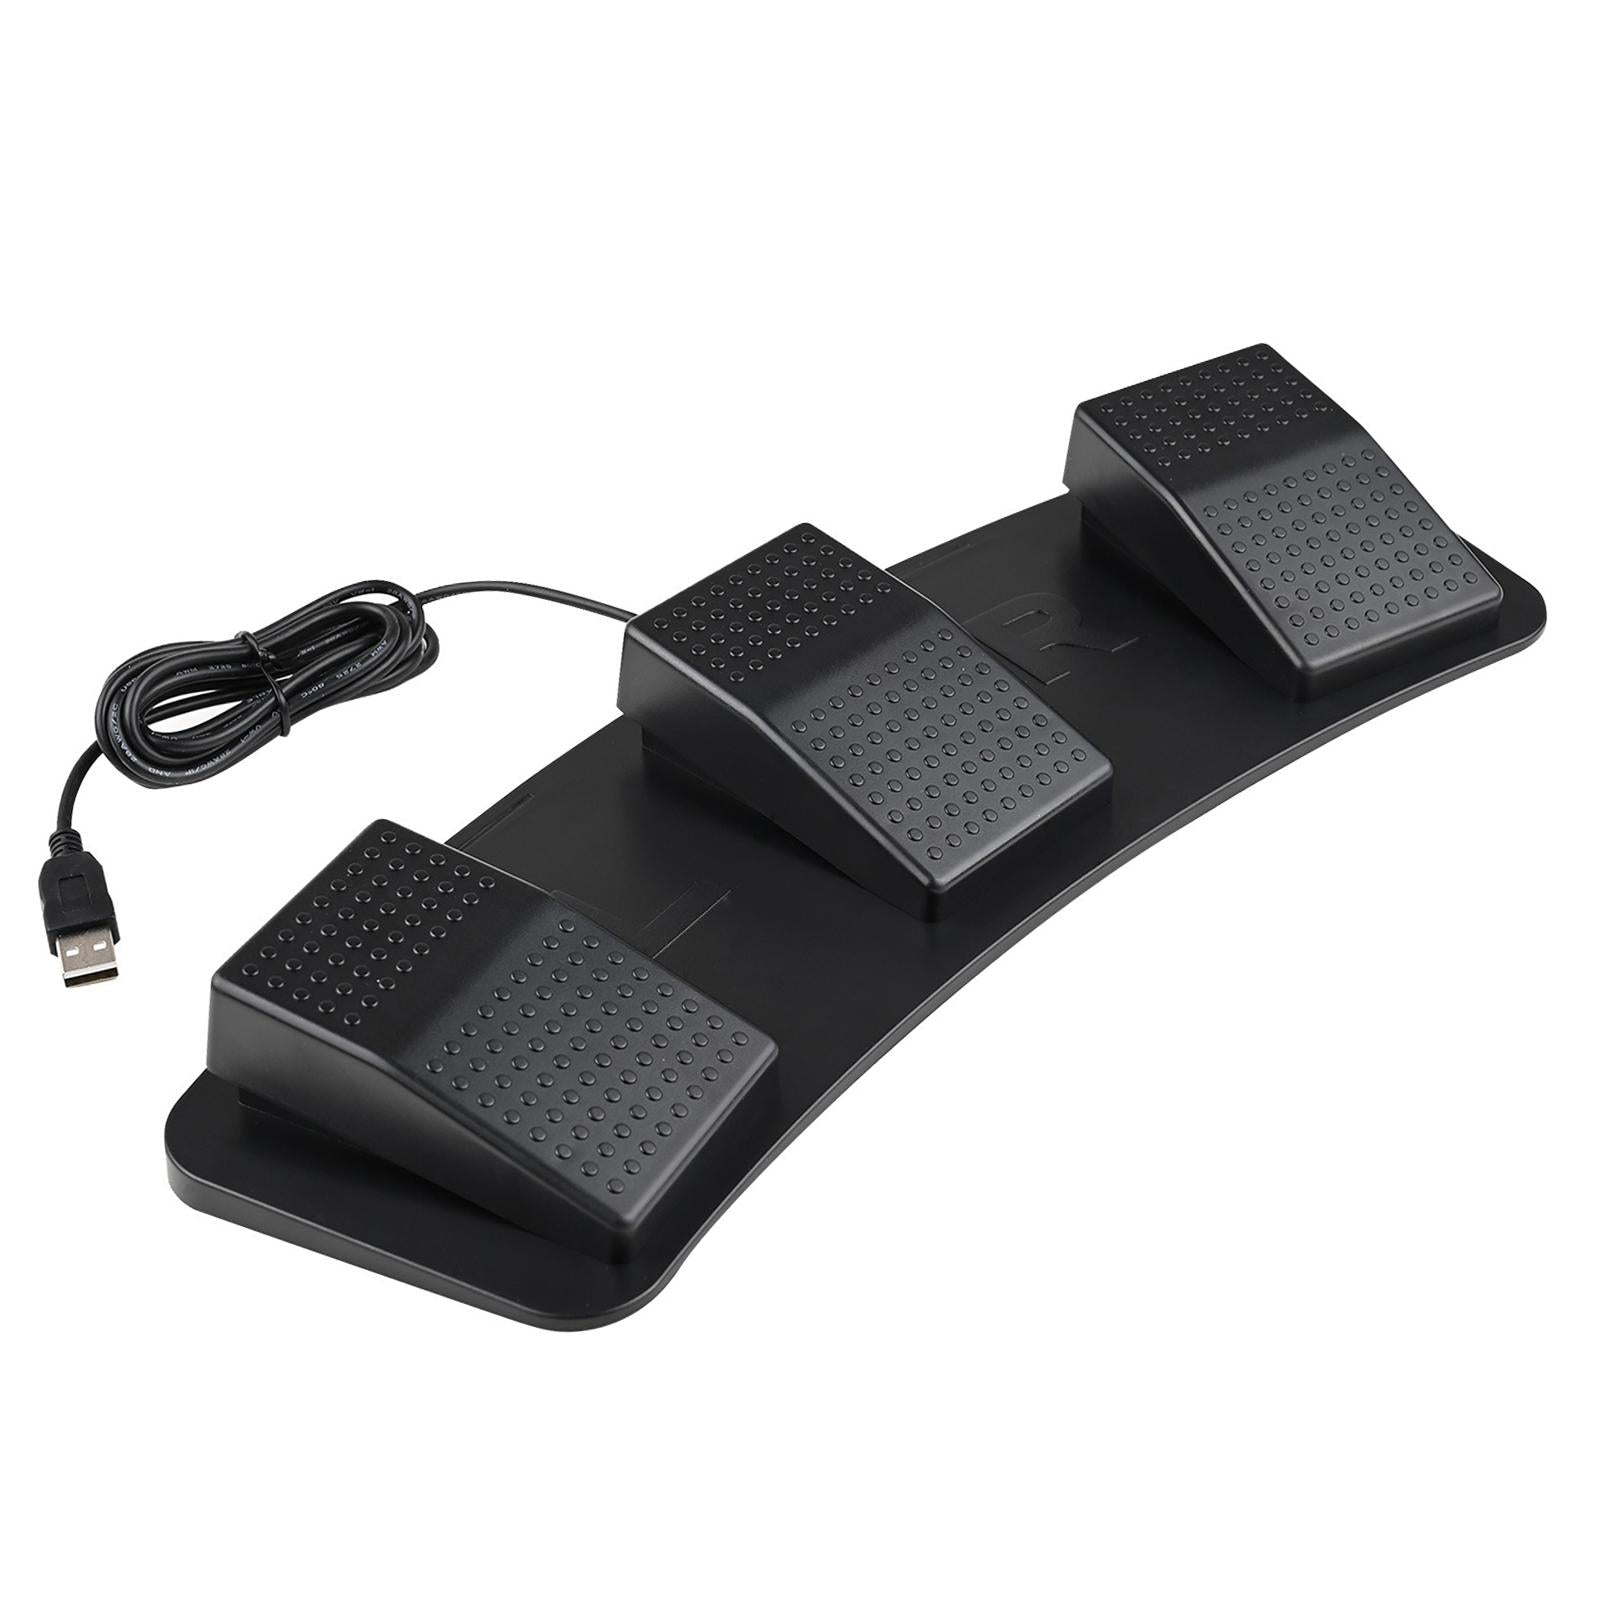 Upgraded USB Three Foot Switch PC Game Foot Pedal for Gaming Equipment